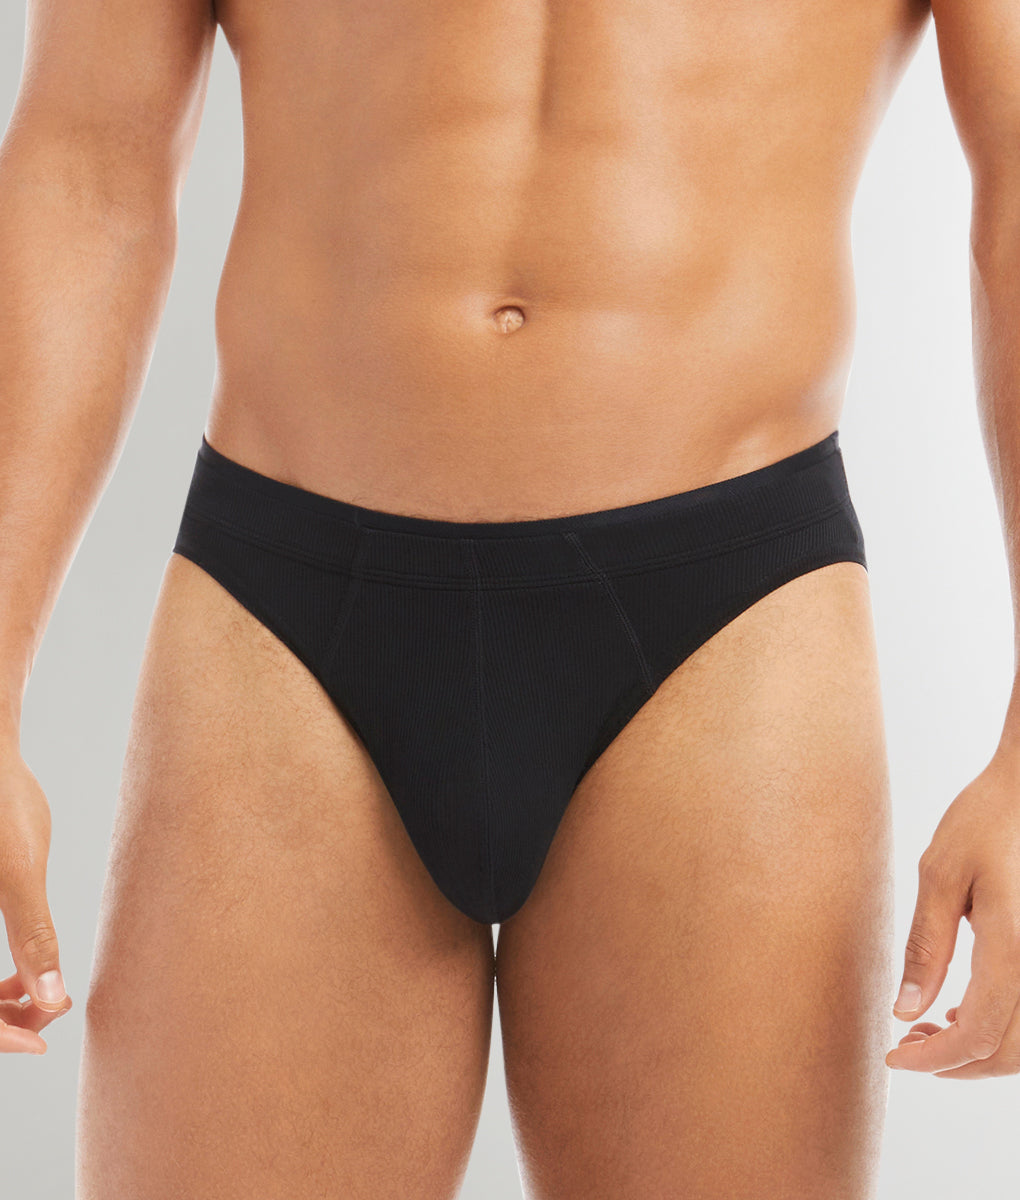 What Are Briefs, According To An Underwear Expert